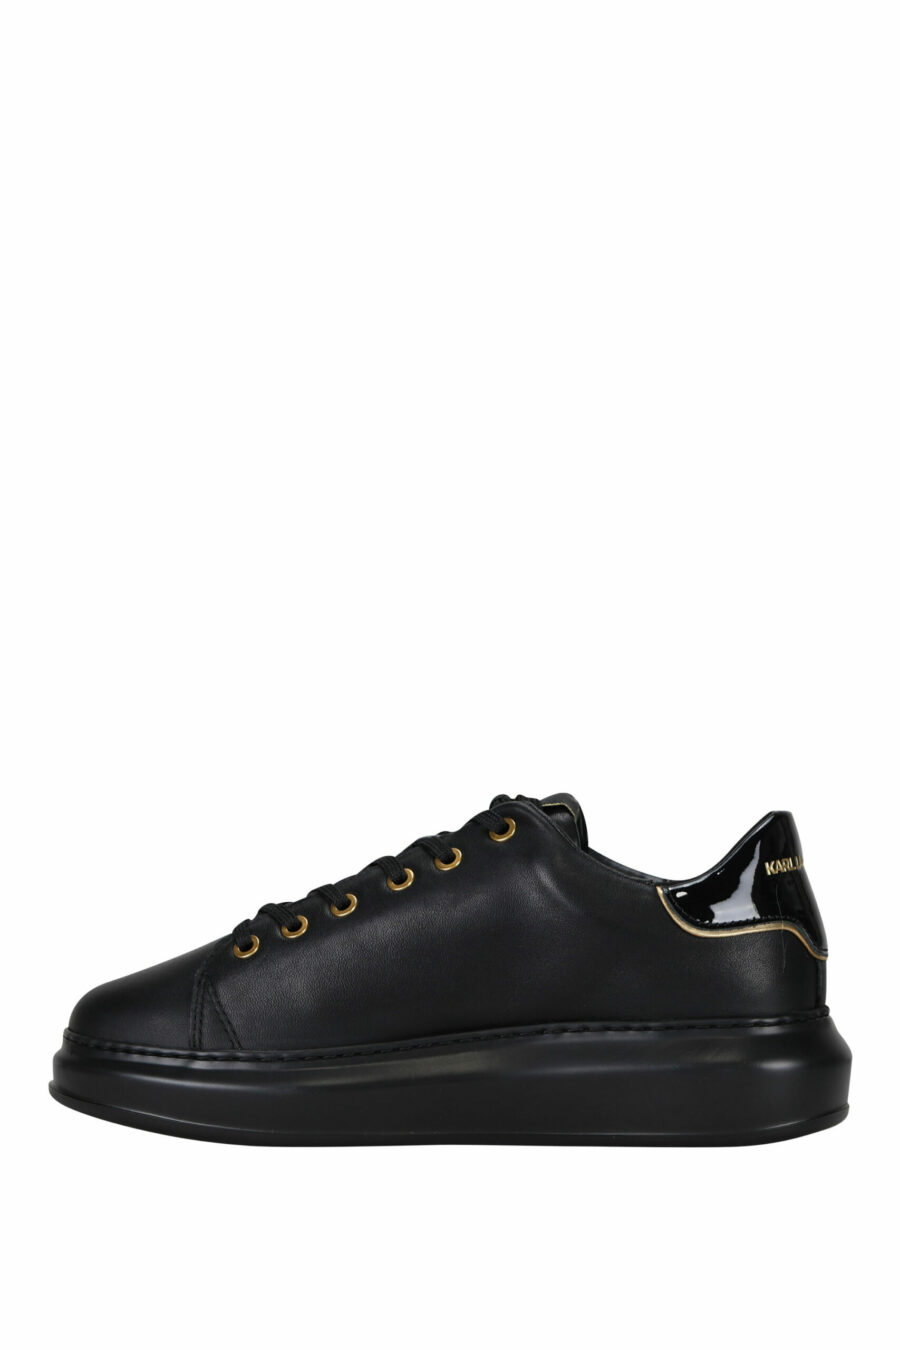 Black trainers with golden "rue st guillaume" logo in metal - 5059529362699 2 scaled